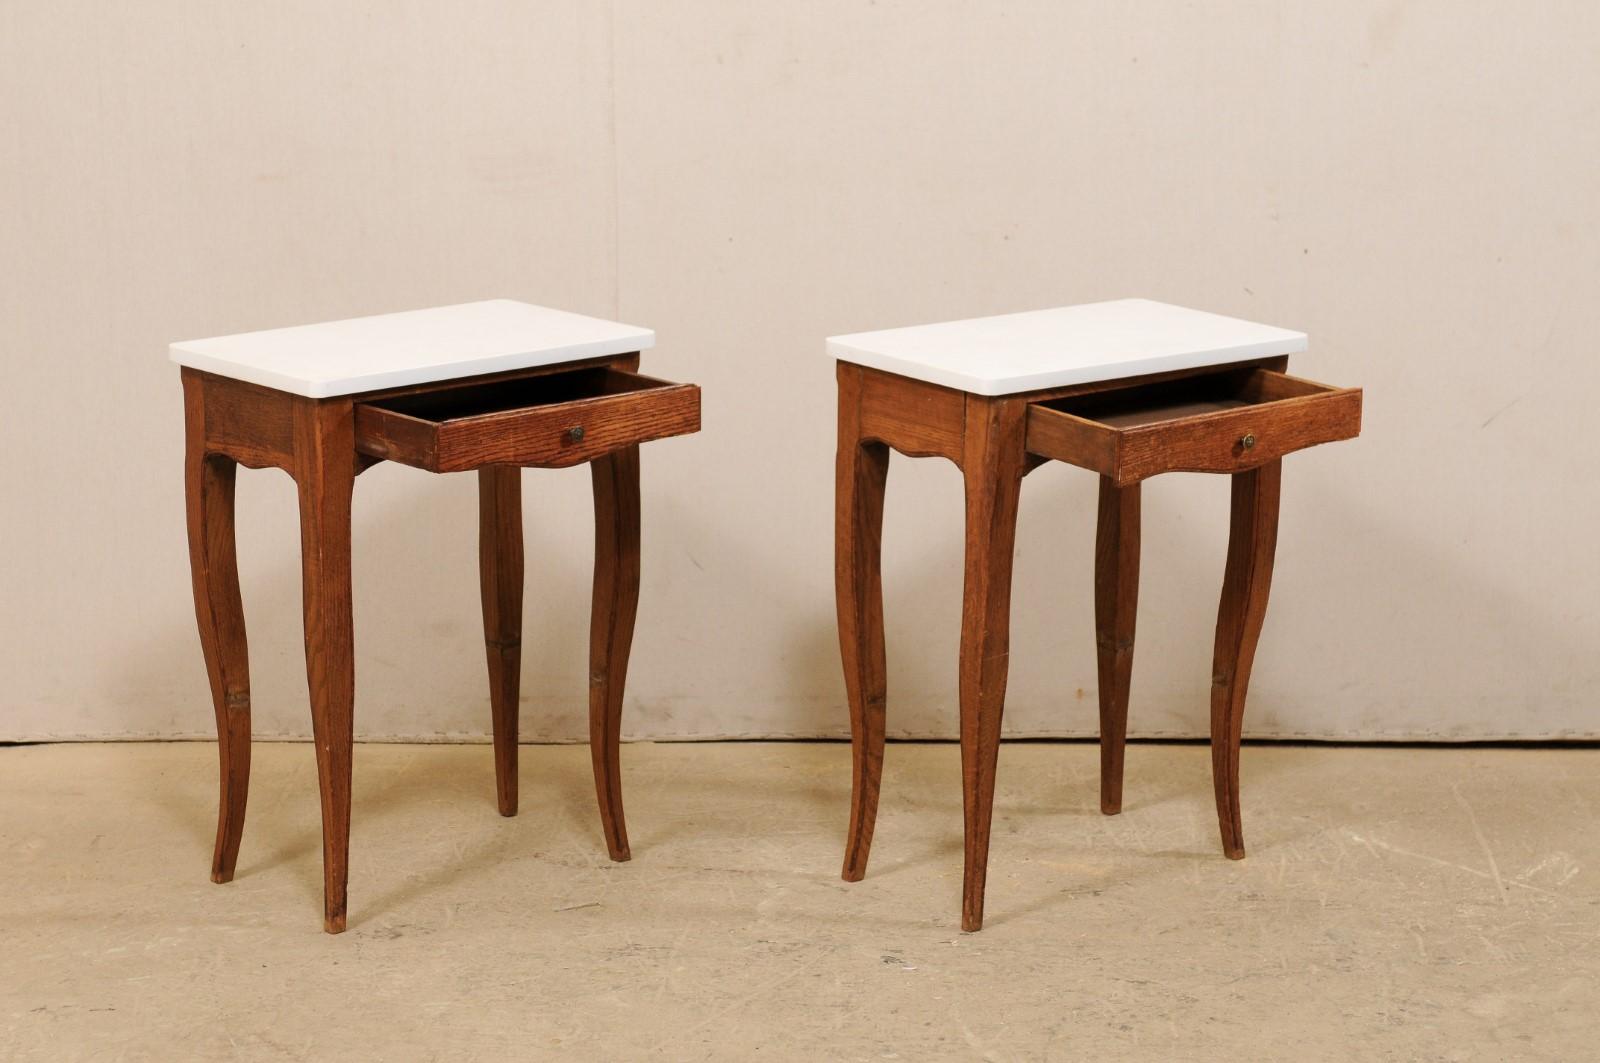 Stone Pair of 1920s French Single-Drawer Side Tables with New White Quartz Tops For Sale